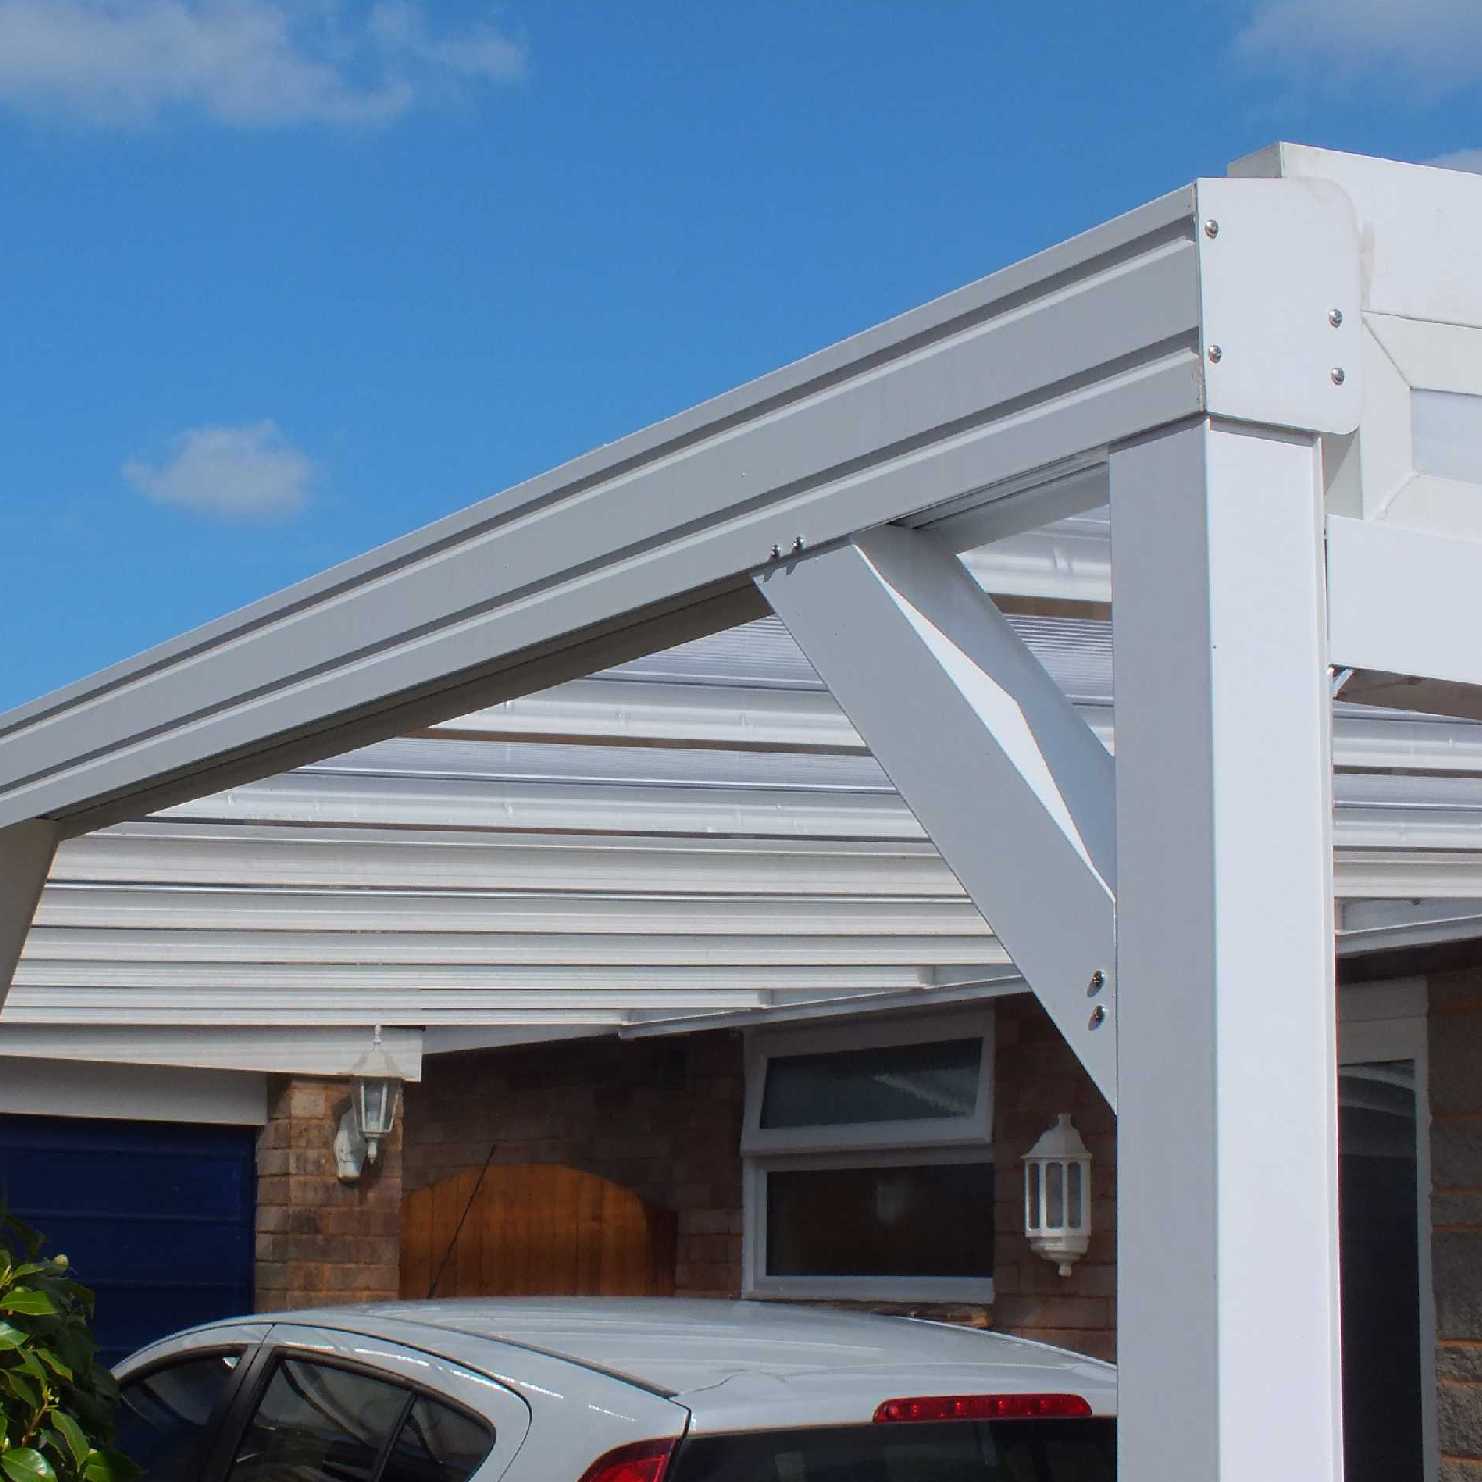 Buy Omega Smart Lean-To Canopy, White with 16mm Polycarbonate Glazing - 7.8m (W) x 3.5m (P), (4) Supporting Posts online today